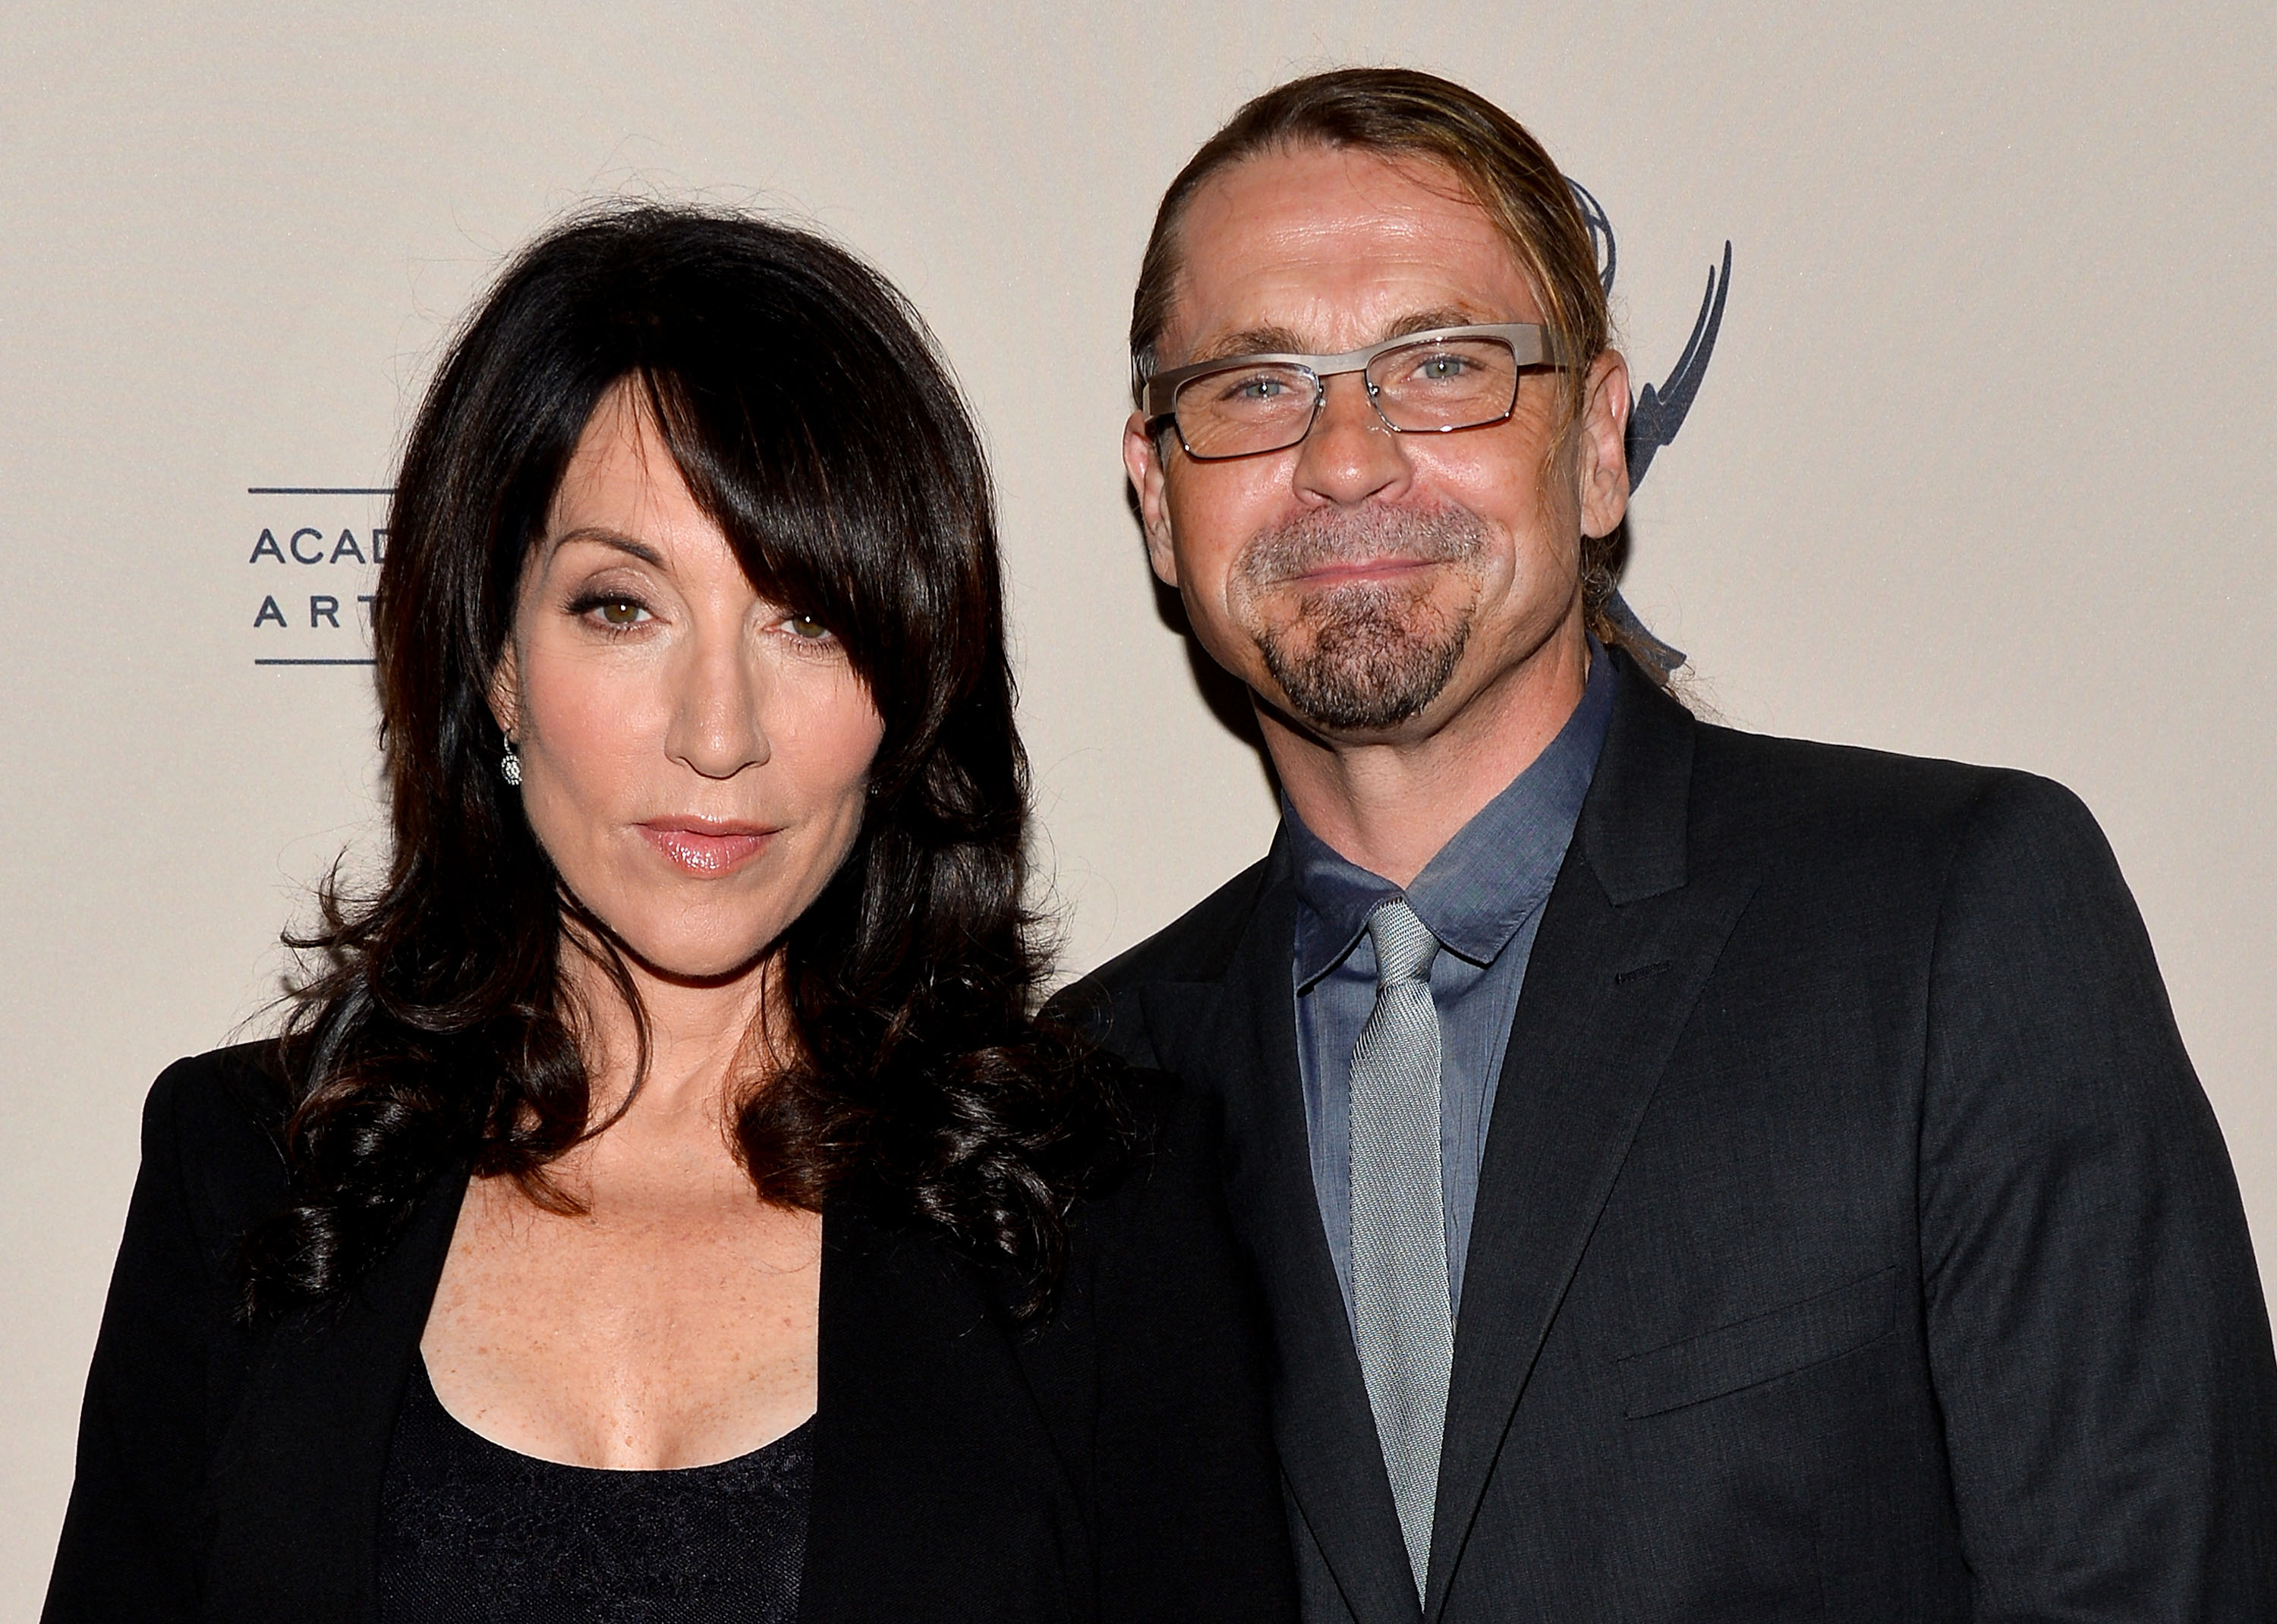 Katey Sagal and Kurt Sutter of "Sons of Anarchy"